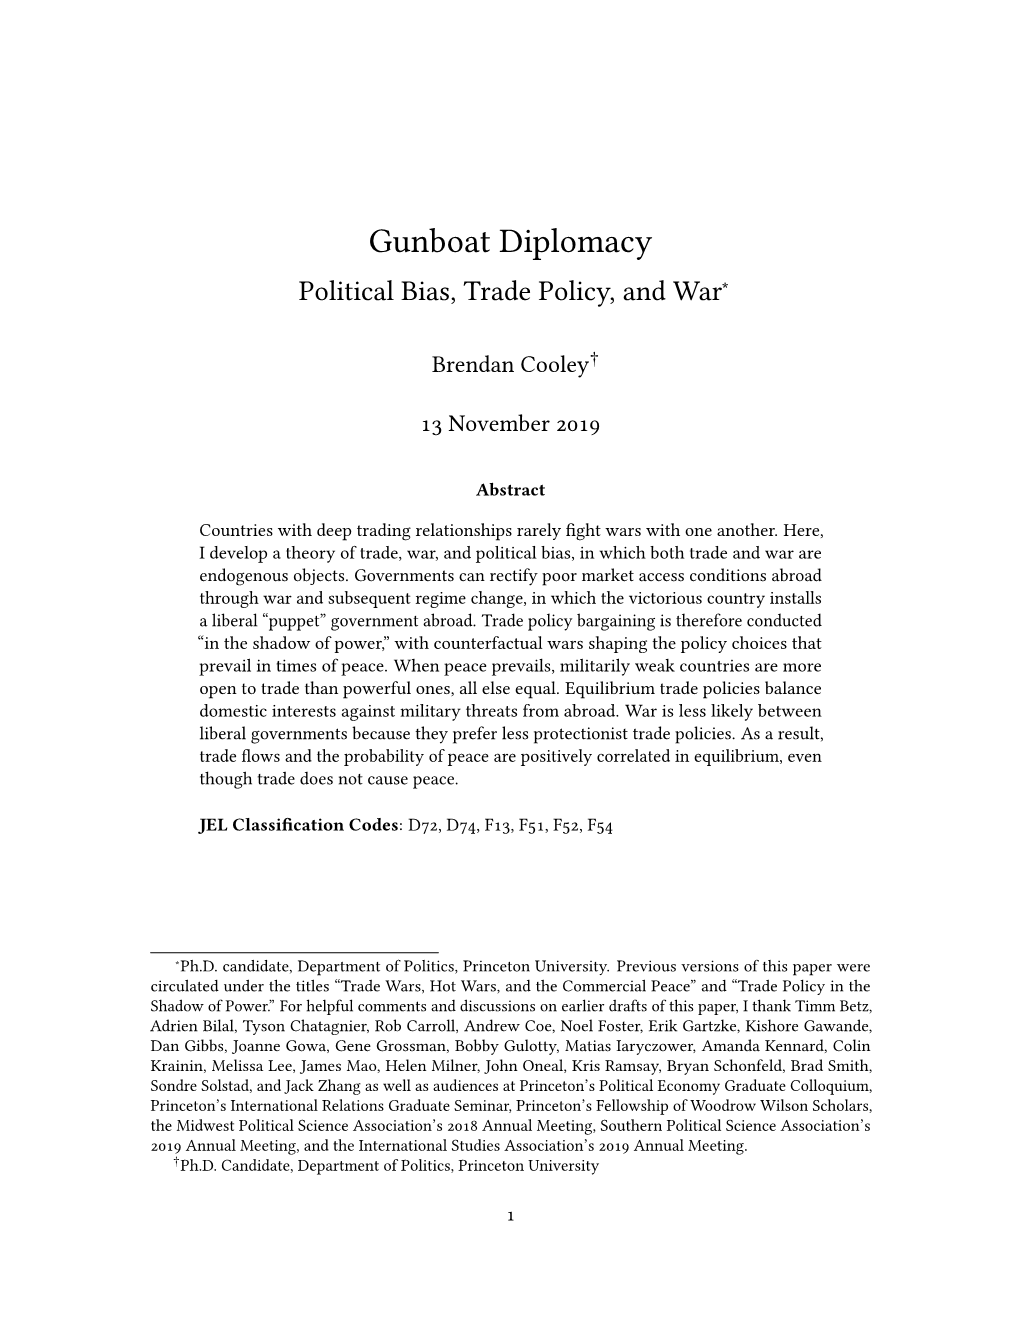 Gunboat Diplomacy: Political Bias, Trade Policy, And